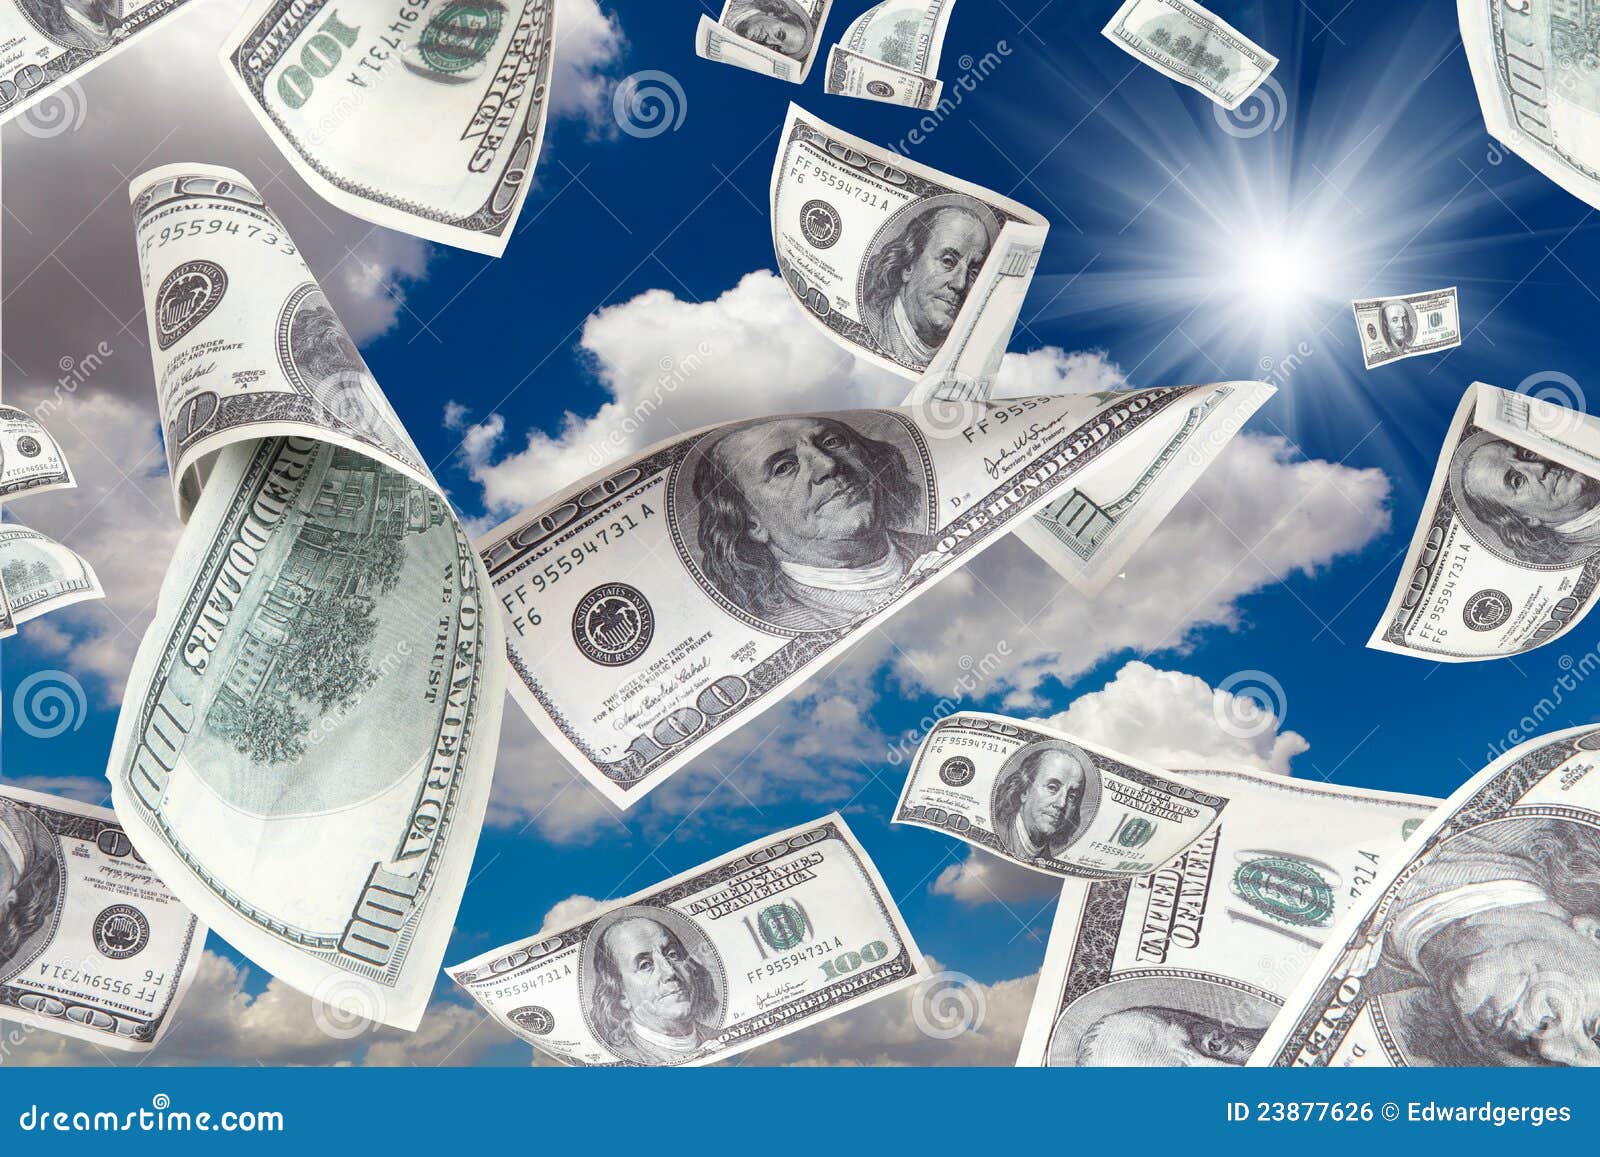 clipart of money falling - photo #17